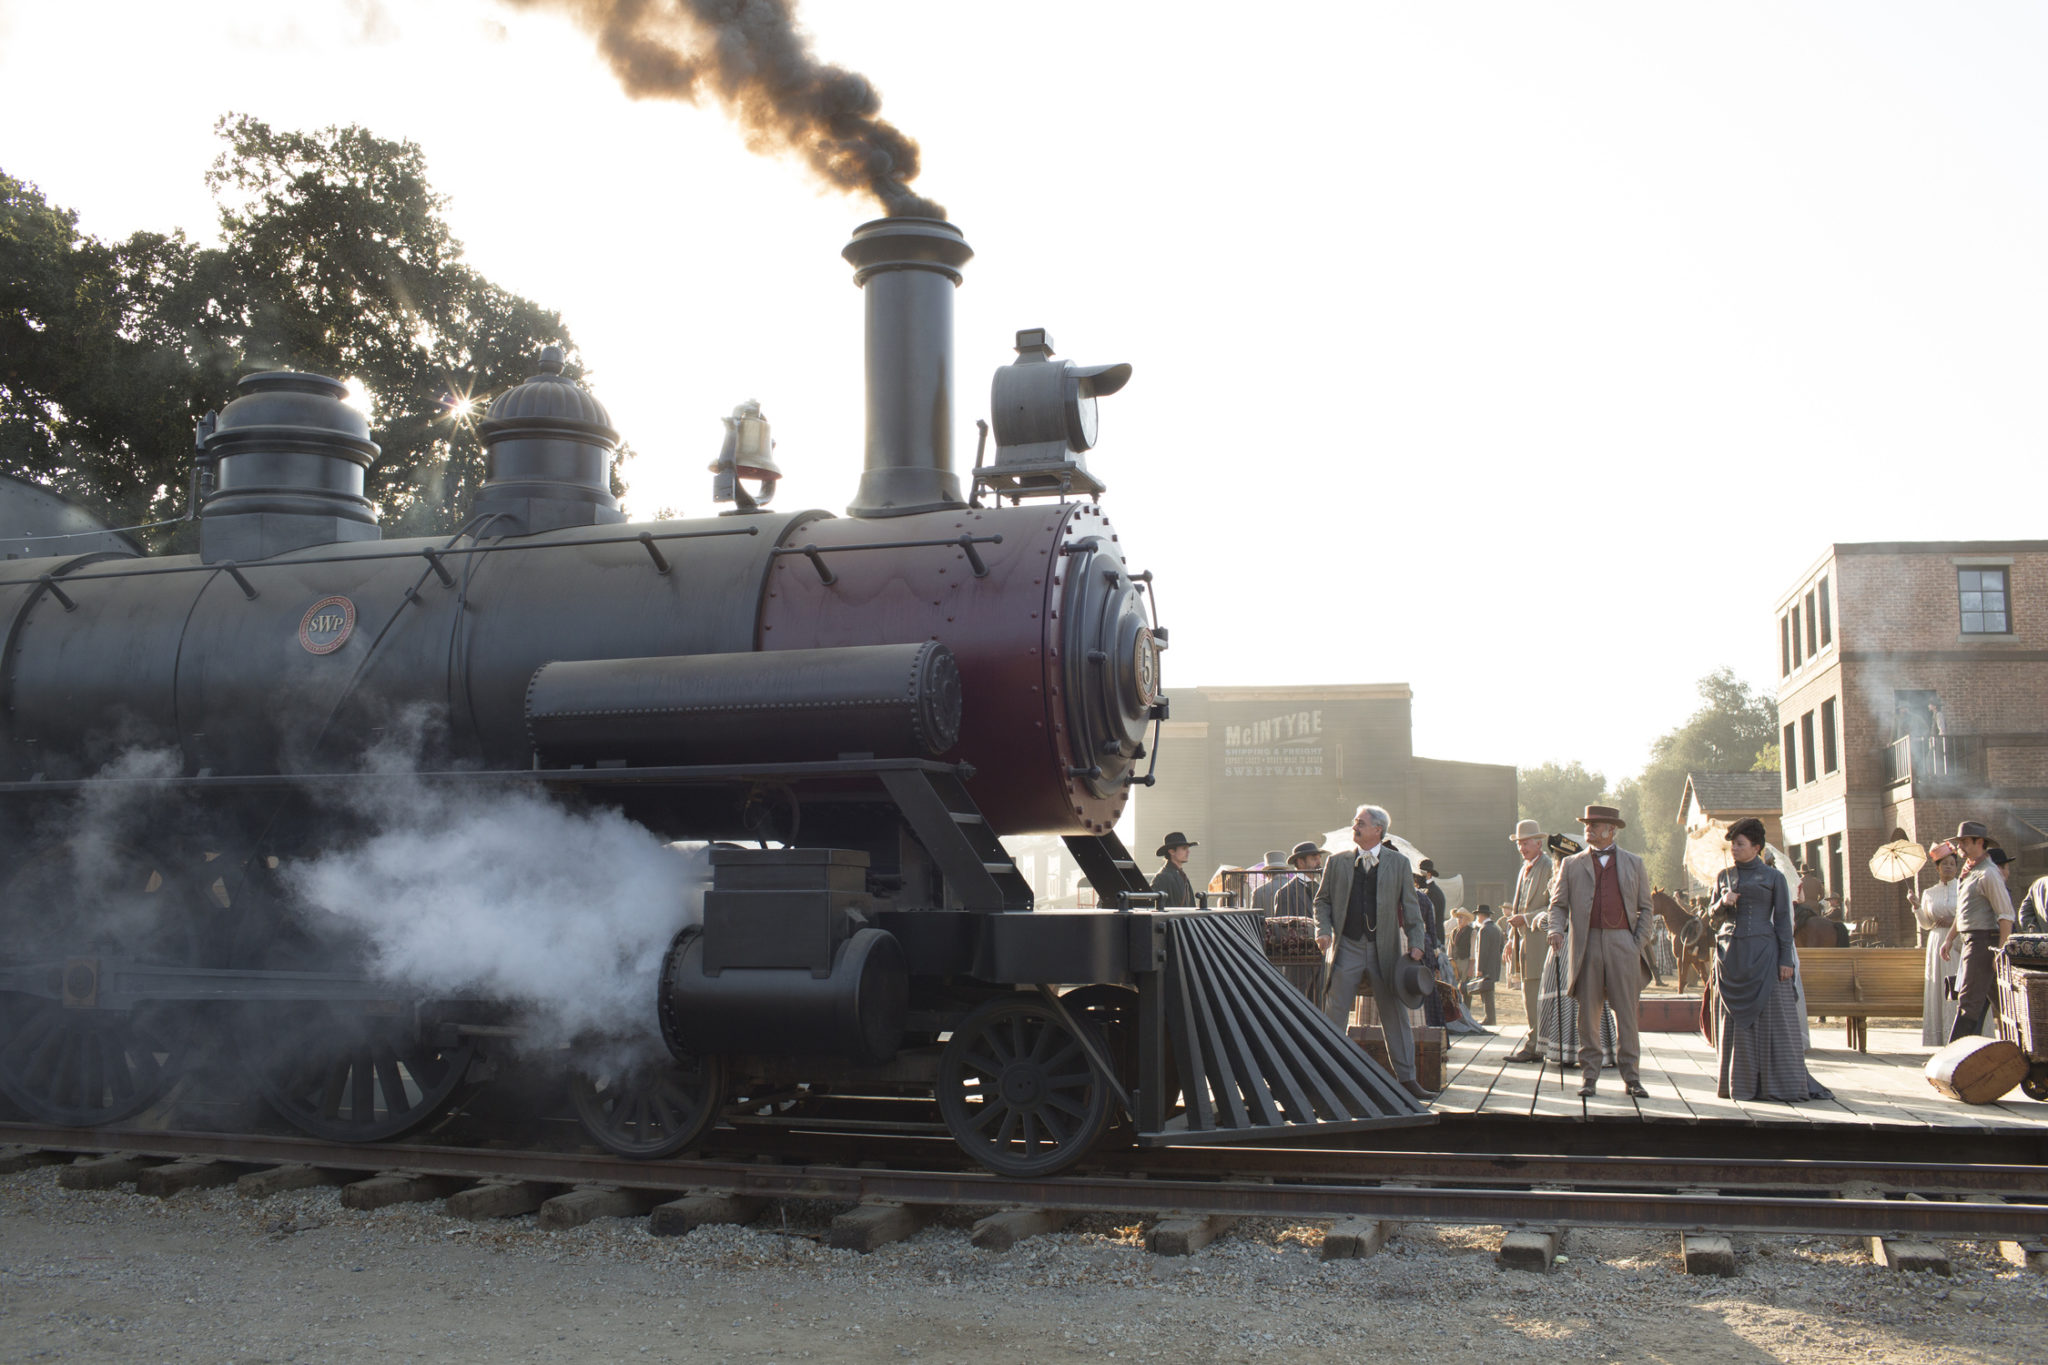 Visitors arrive in Westworld by train.